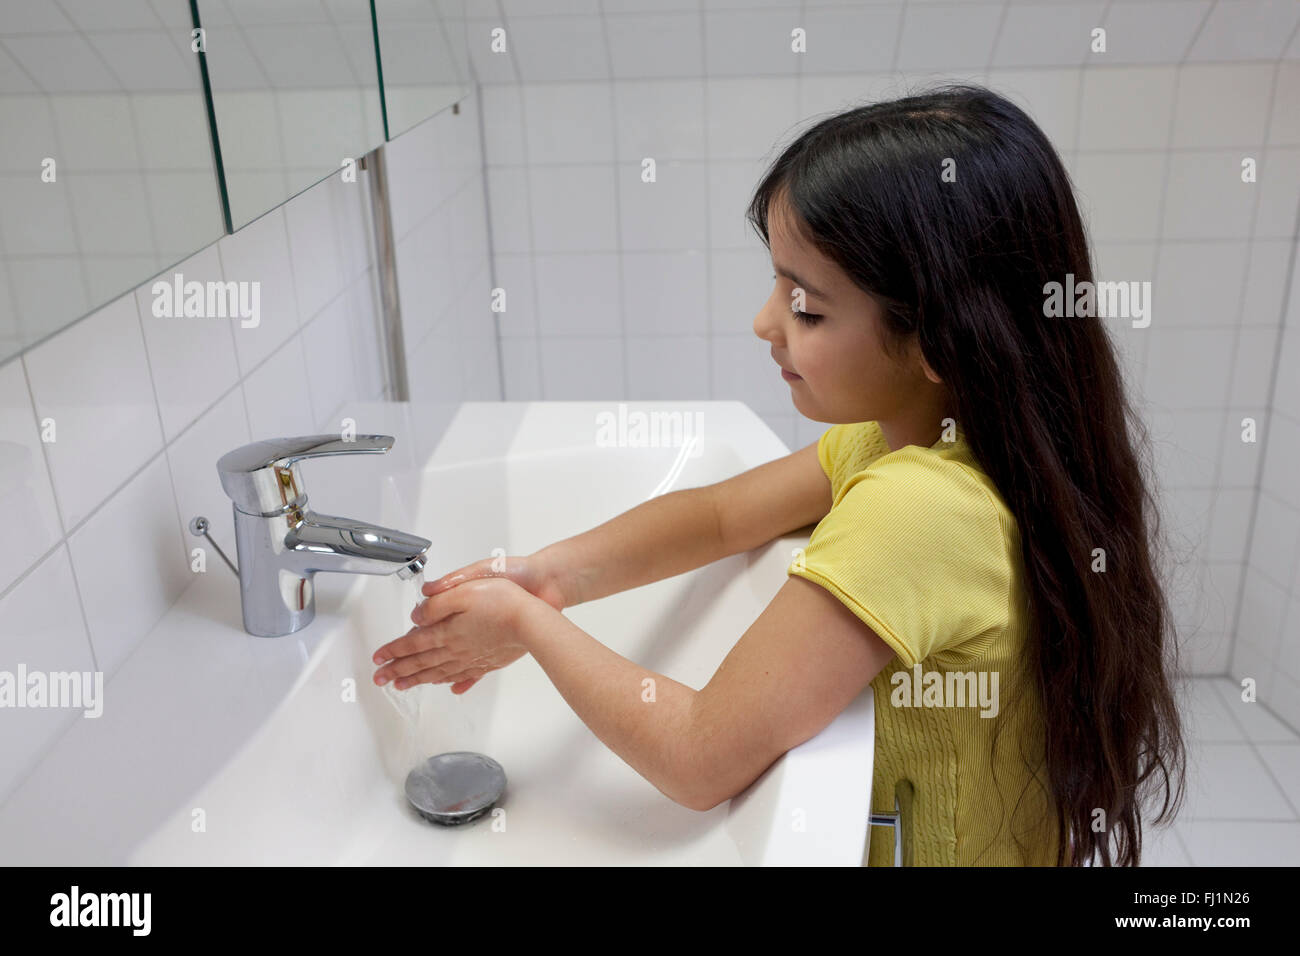 Little girl is washing her hands in the bathroom Stock Photo